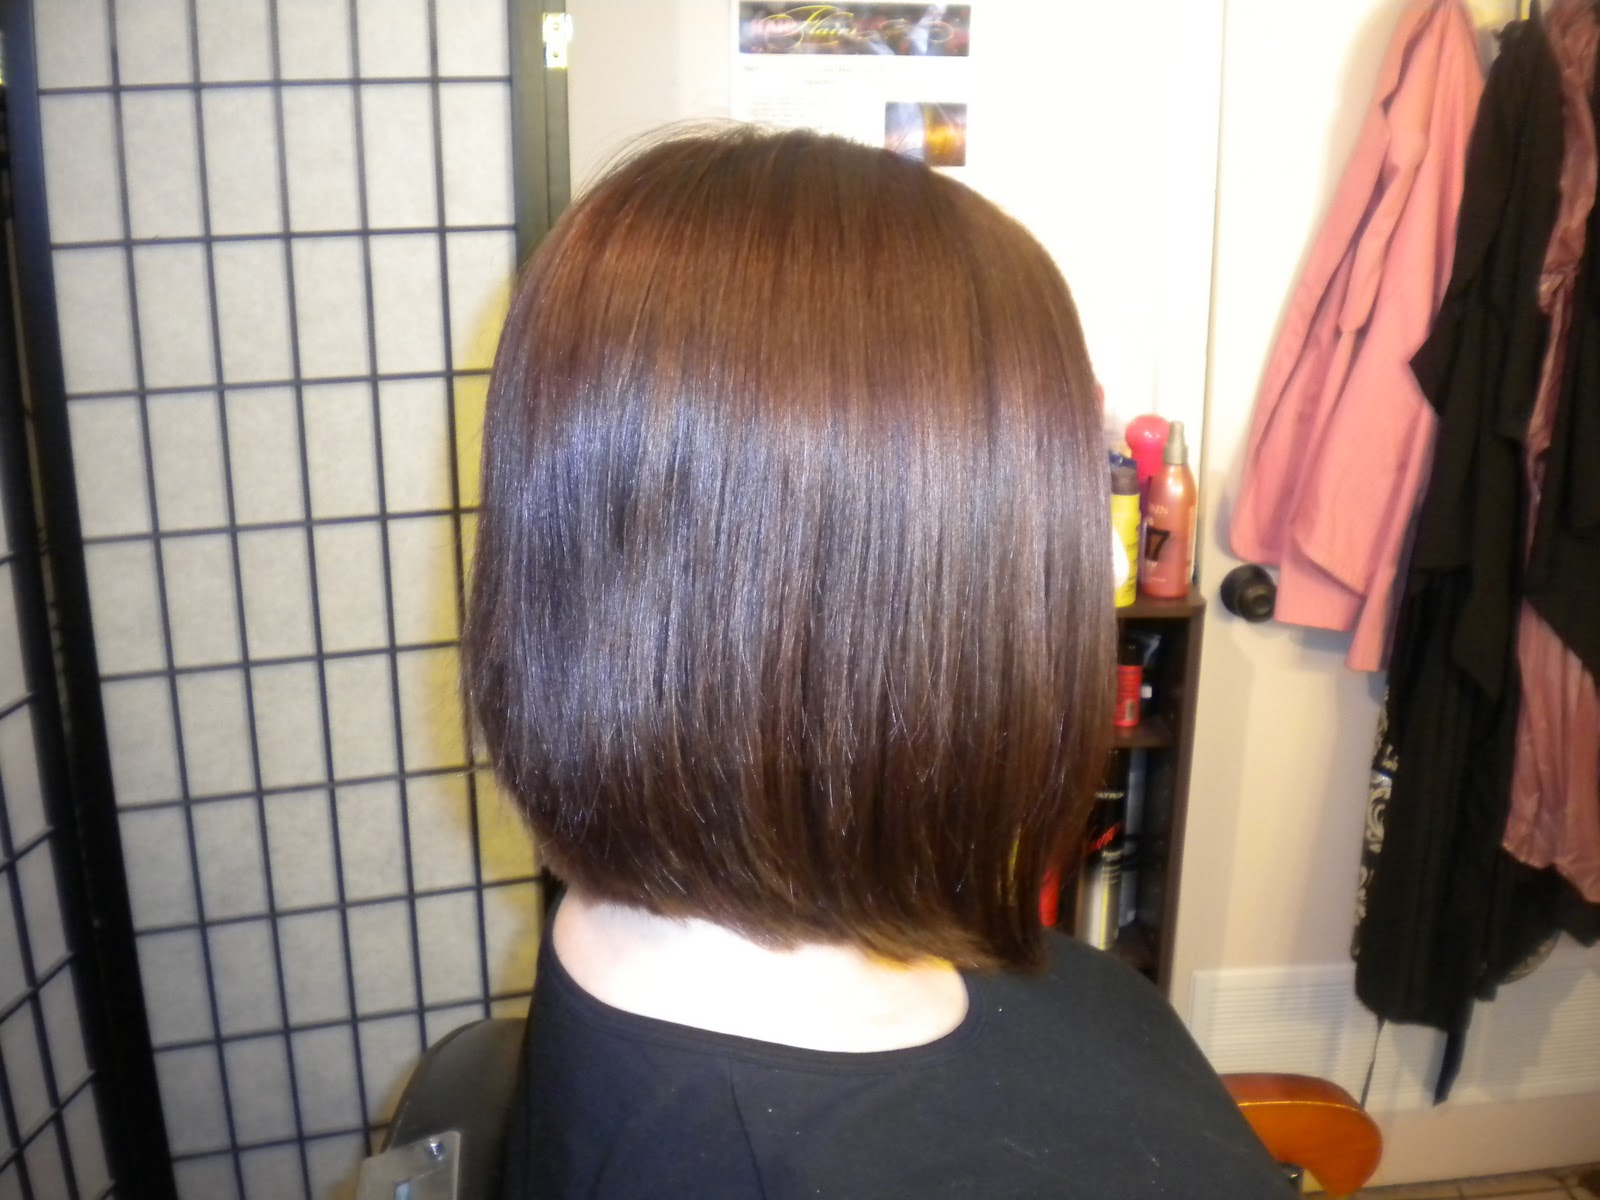  of a Hairstylist: Asymmetrical Bob Hair Cut/Color Before and Afters